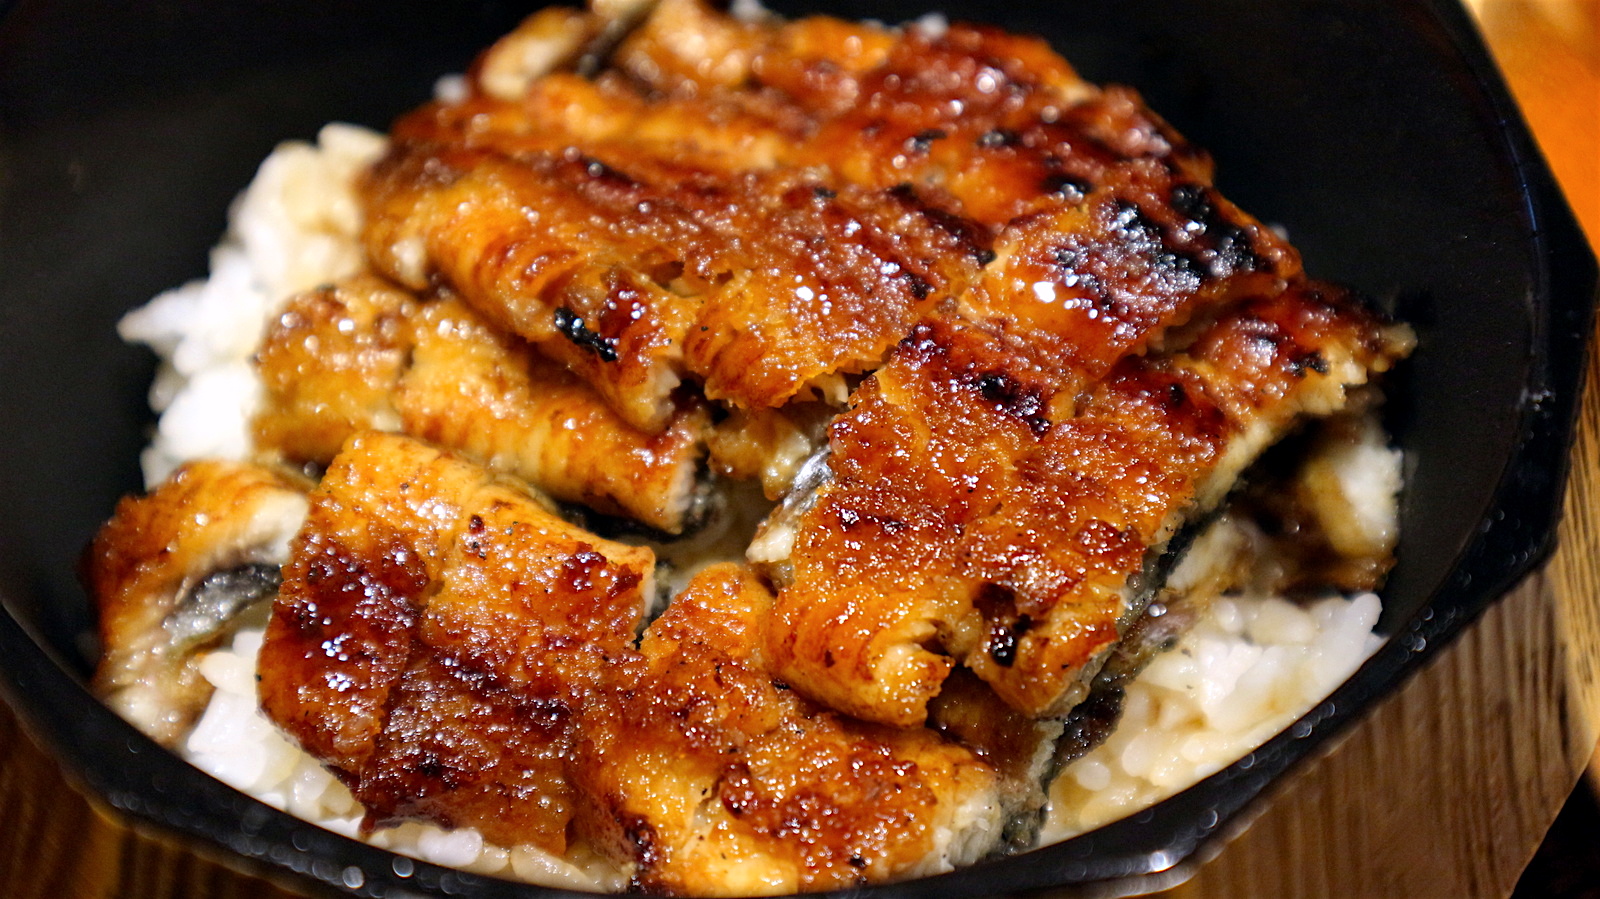 Say Yum Or Yuck to Seafood Dishes to Know How Picky You… Quiz Unagi (Eel) Don